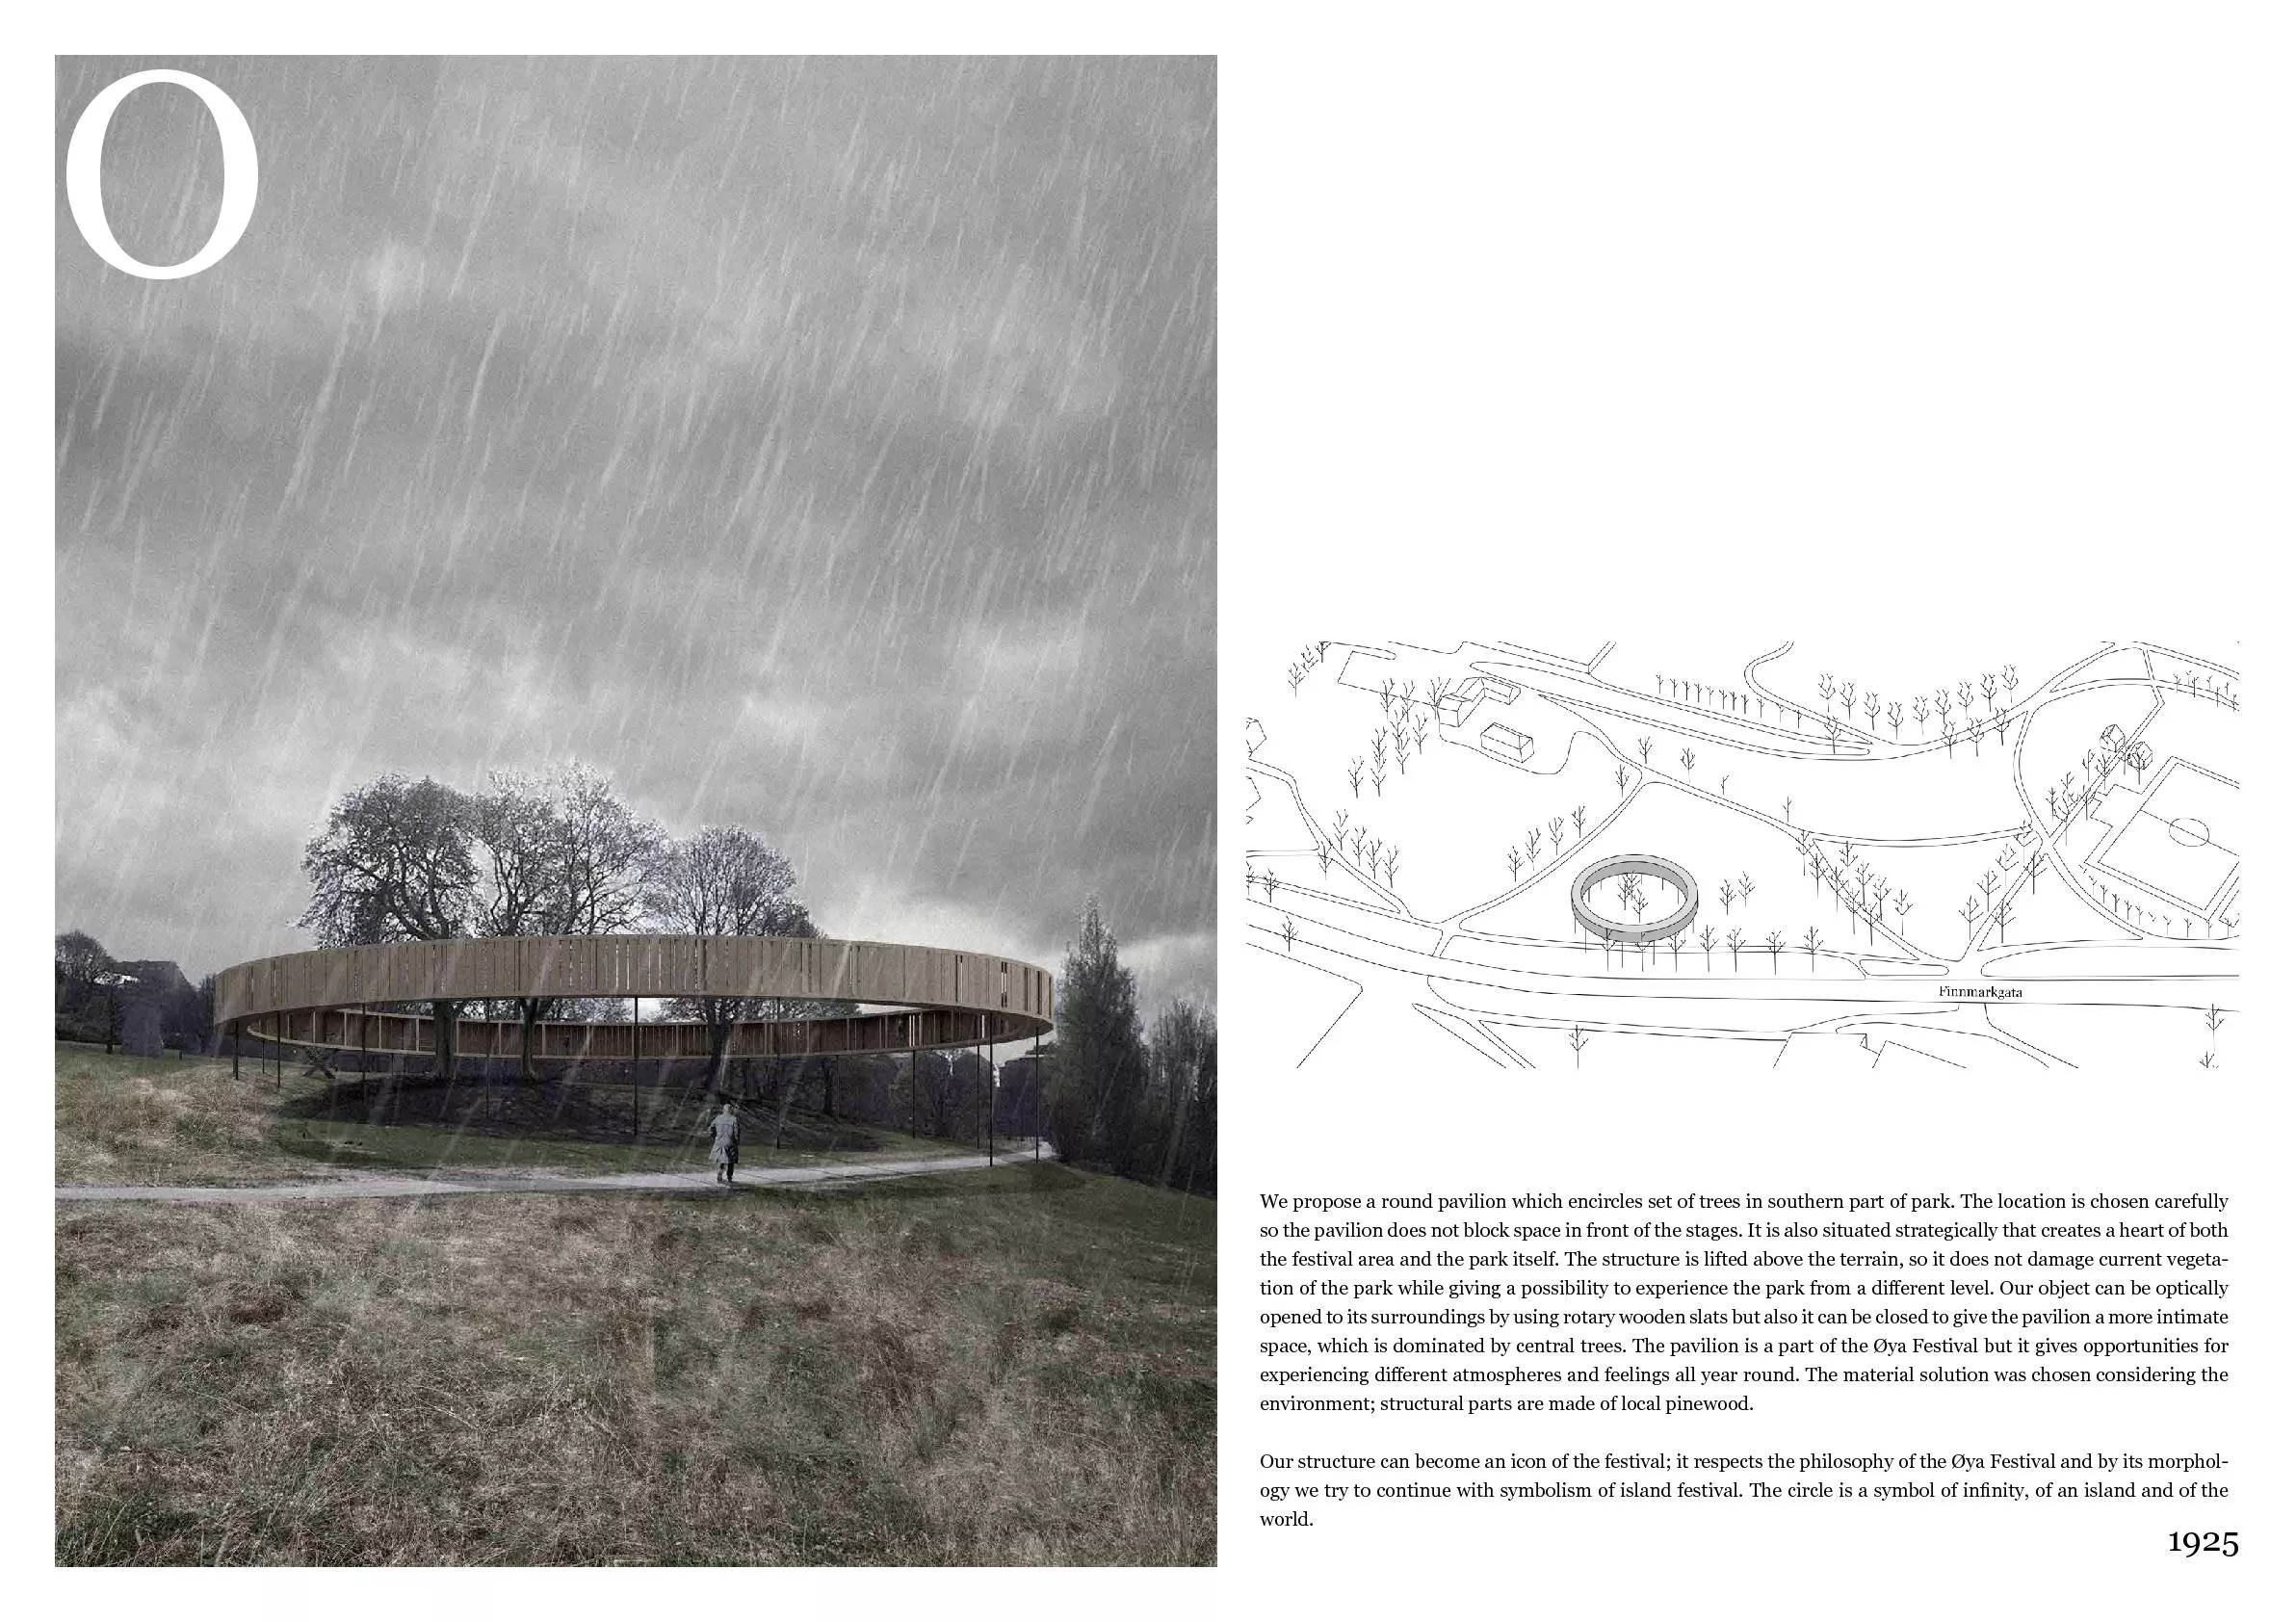 We propose a round pavilion which encircles set of trees in southern p